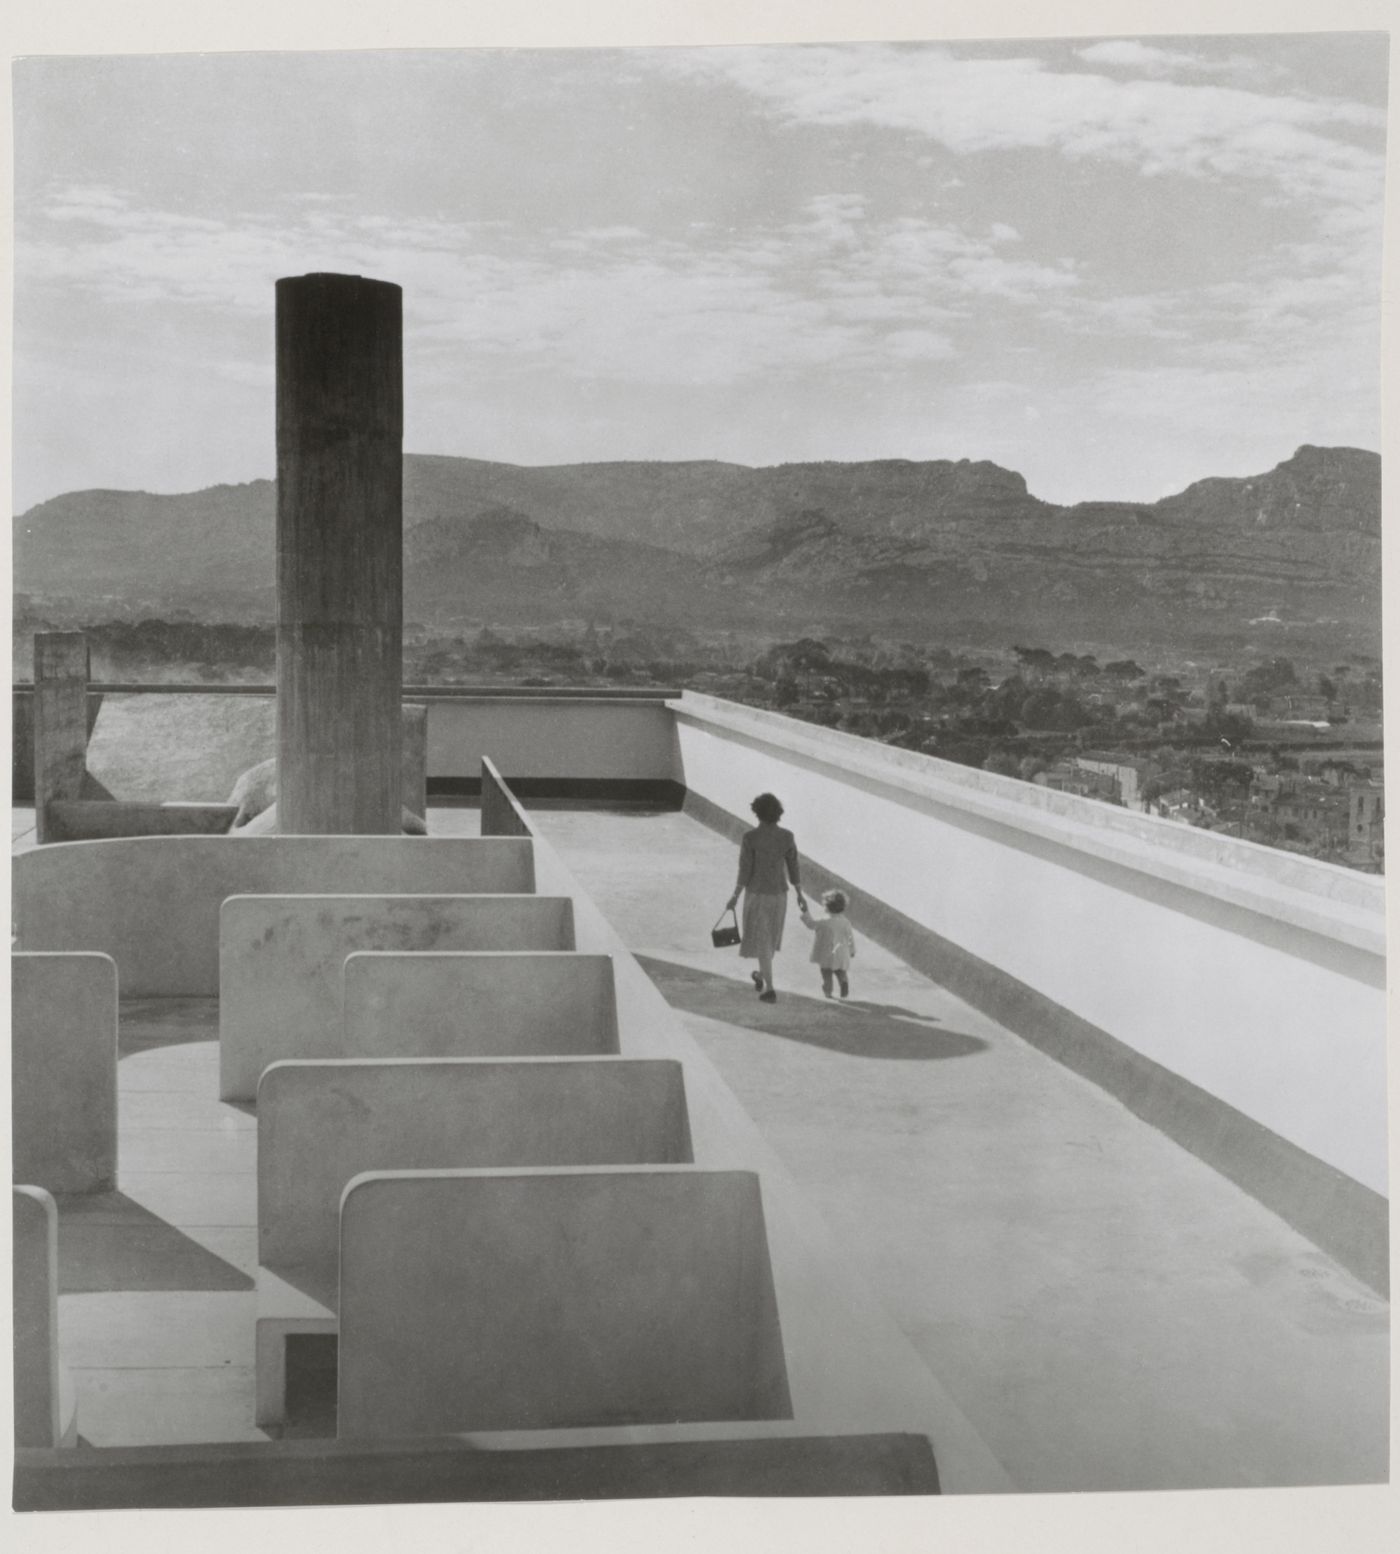 View of the roof of Unité d'habitation showing a woman and child on the running track and mountains in the distance, Marseille, France